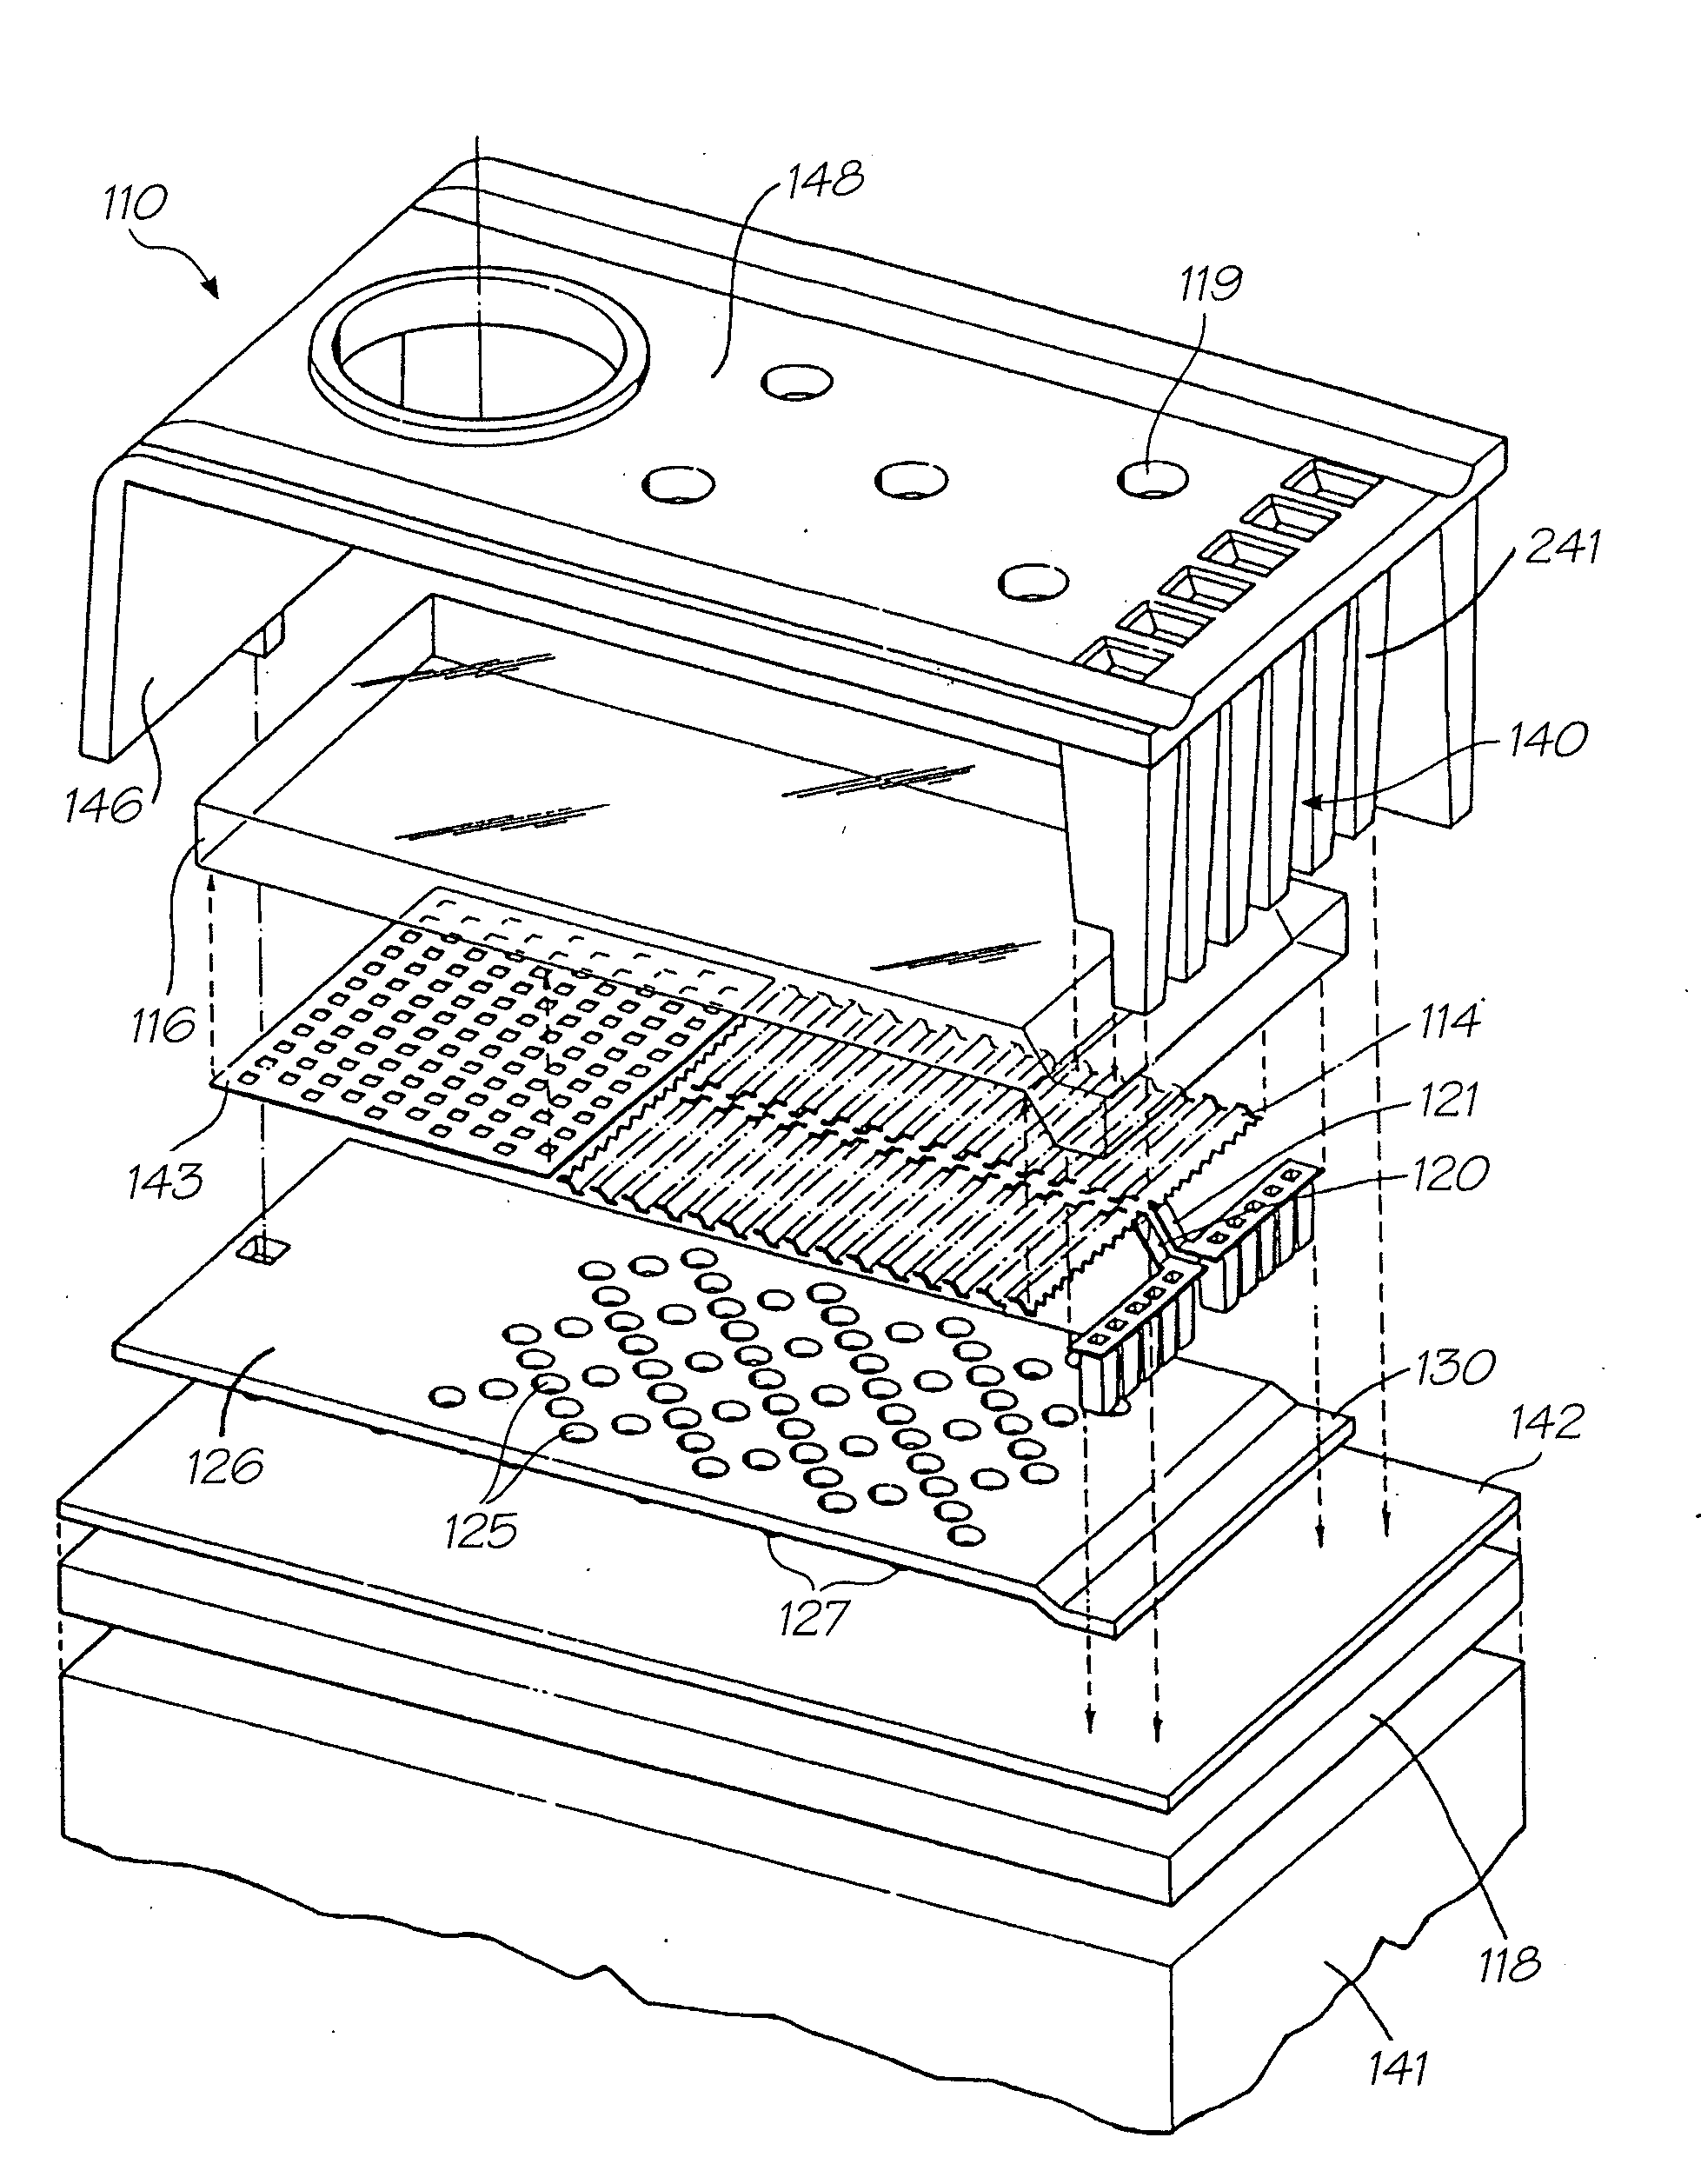 Inkjet printhead with filter structure at inlet to ink chambers